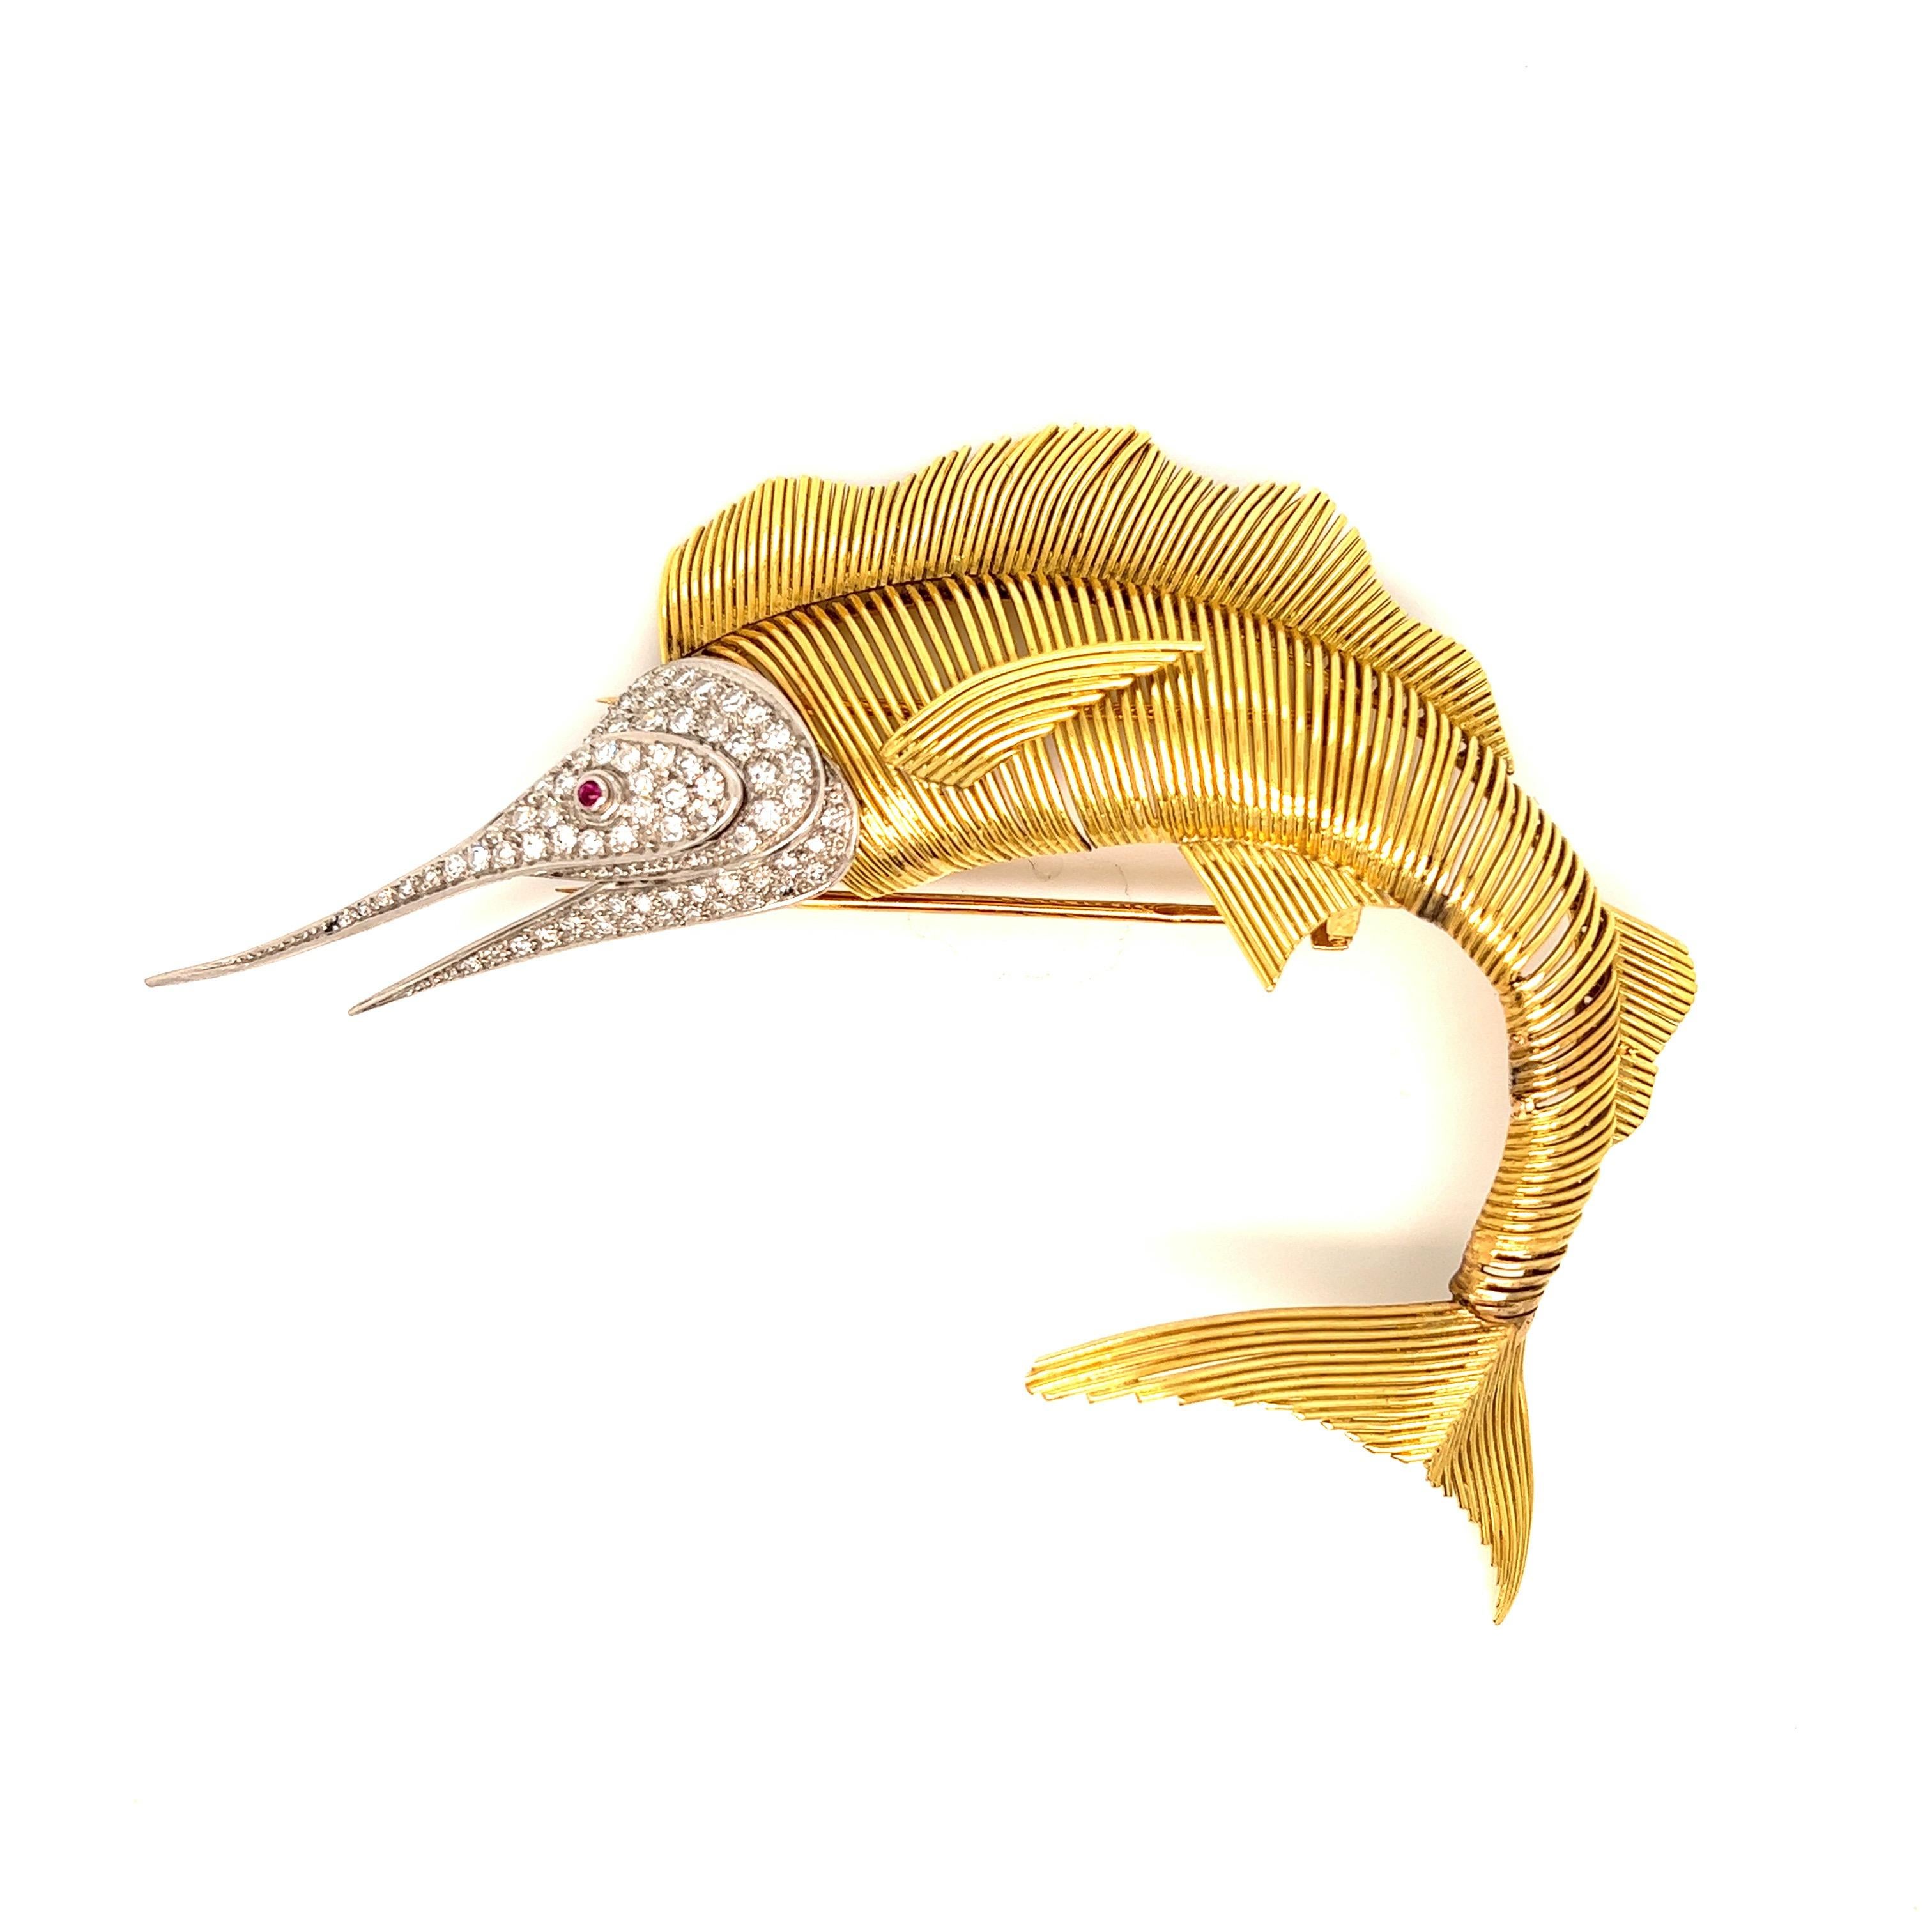 Gold platinum diamond sailfish brooch

Single-cut diamonds, 18 karat yellow gold; marked with French import stamps, 750 

Size: width 3.63 inches, length 2.88 inches
Total weight: 26.8 grams 